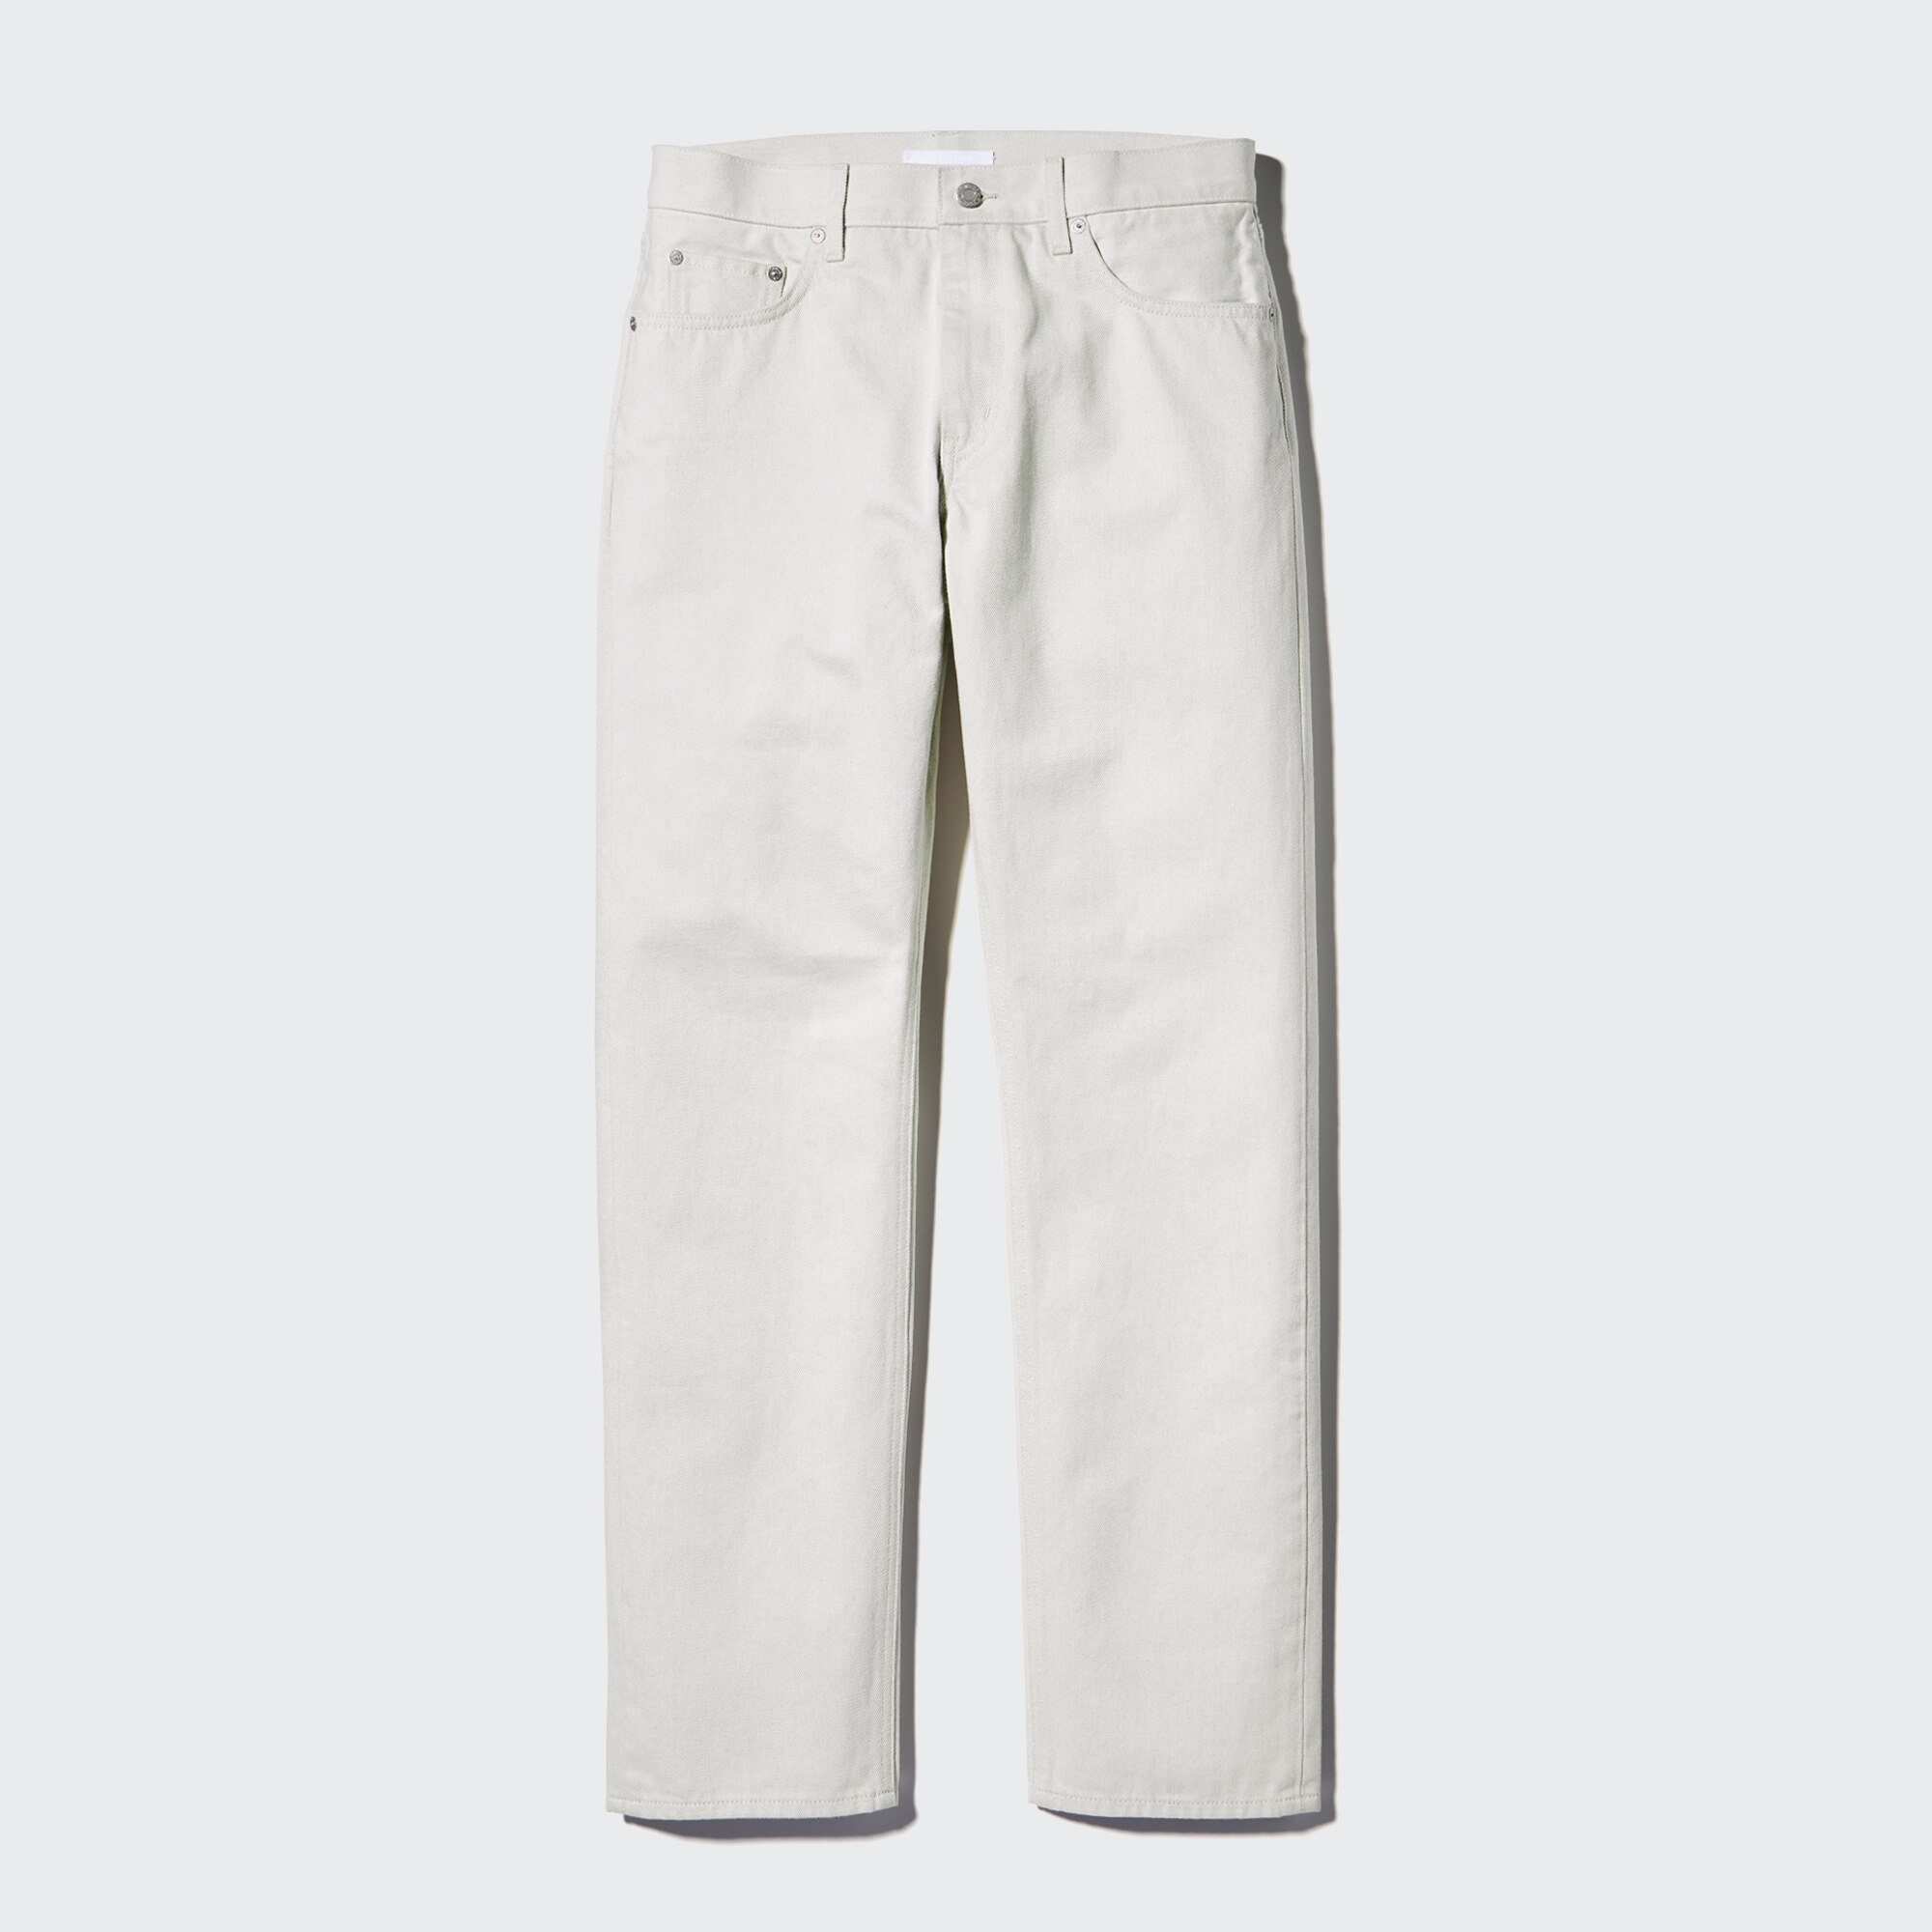 PLST(プラステ)公式 | UNIQLO and HELMUT LANG Classic Cut Jeans ...